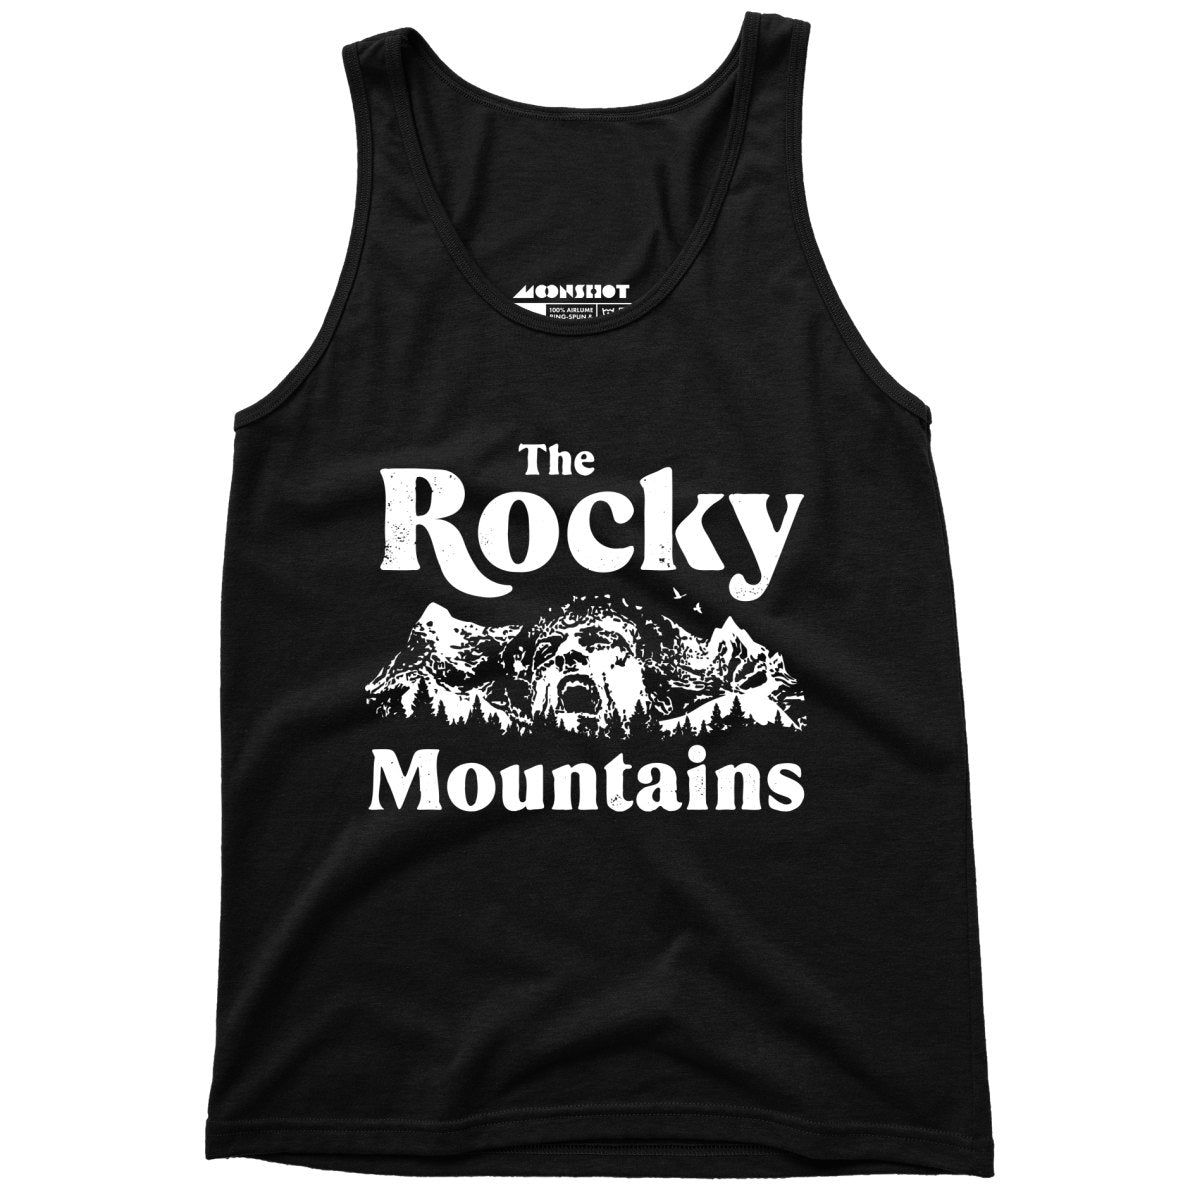 The Rocky Mountains - Unisex Tank Top